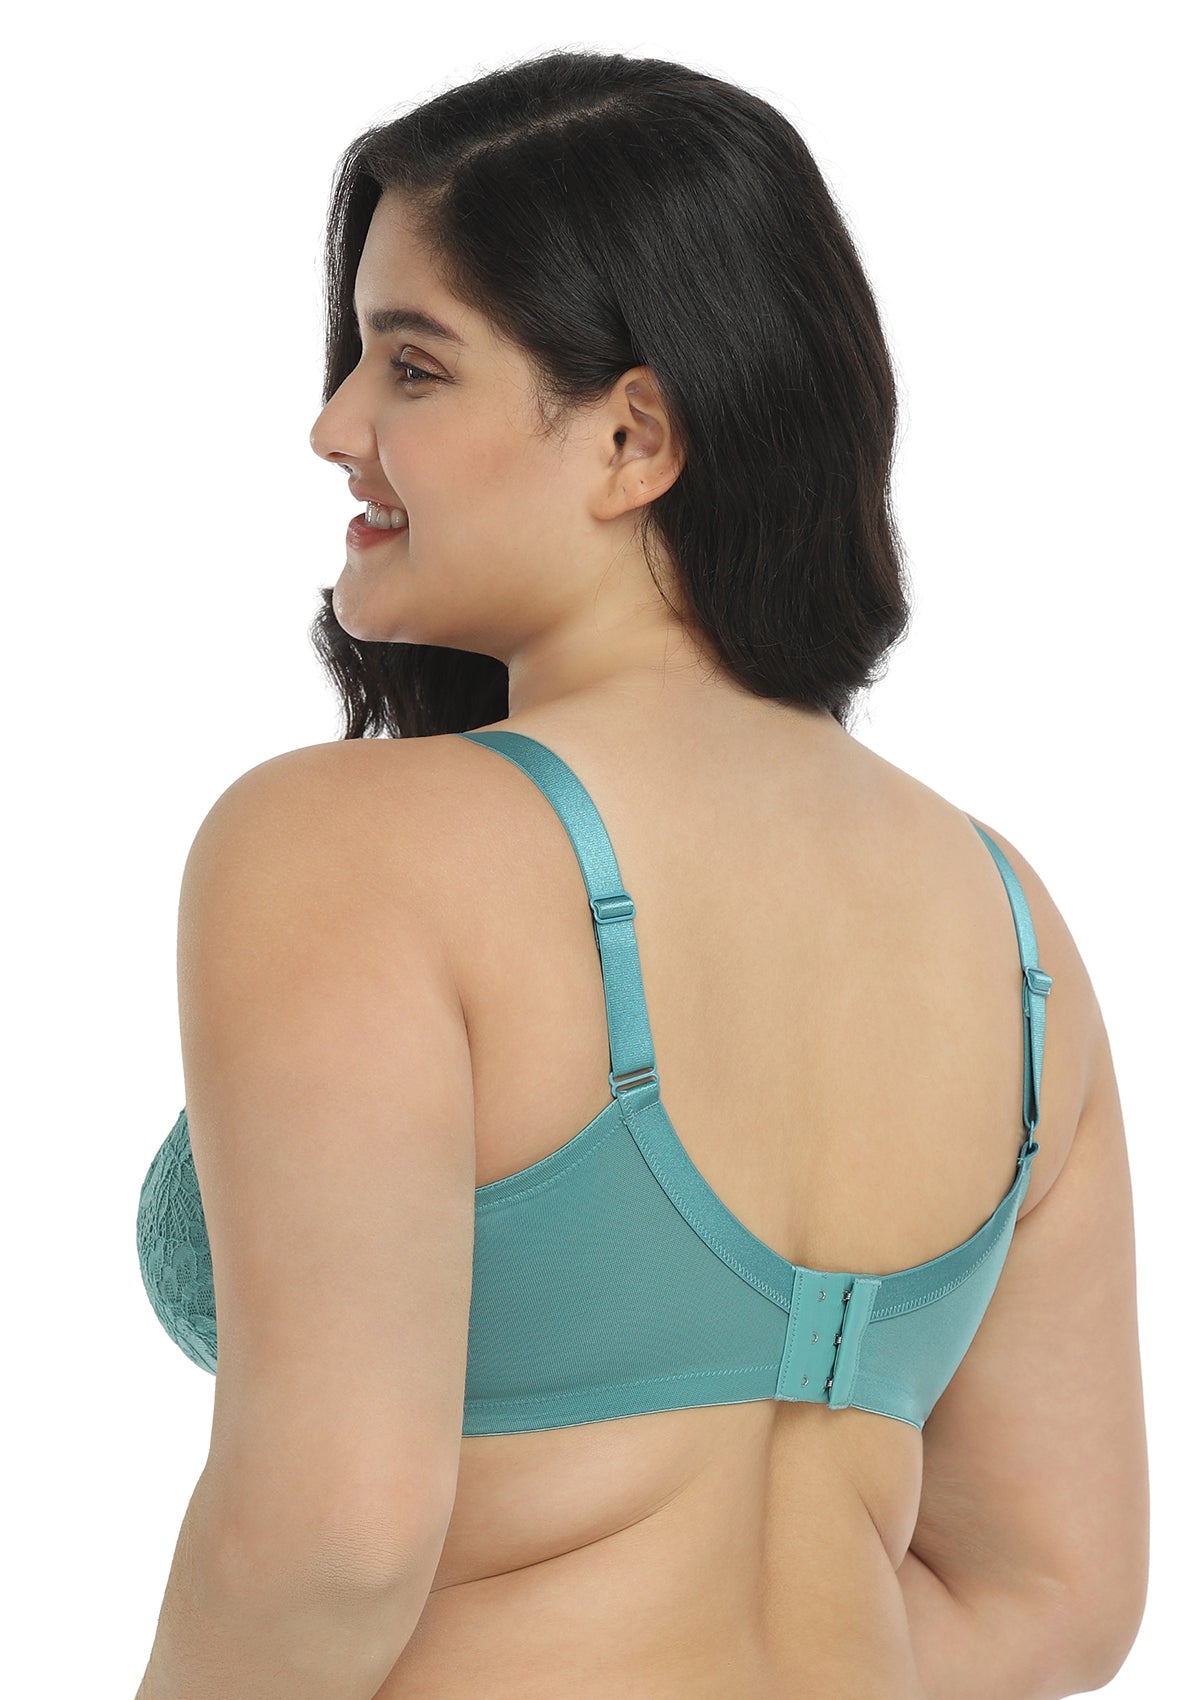 HSIA Paeonia Lace Full Coverage Underwire Non-Padded Uplifting Bra - Teal / 34 / D